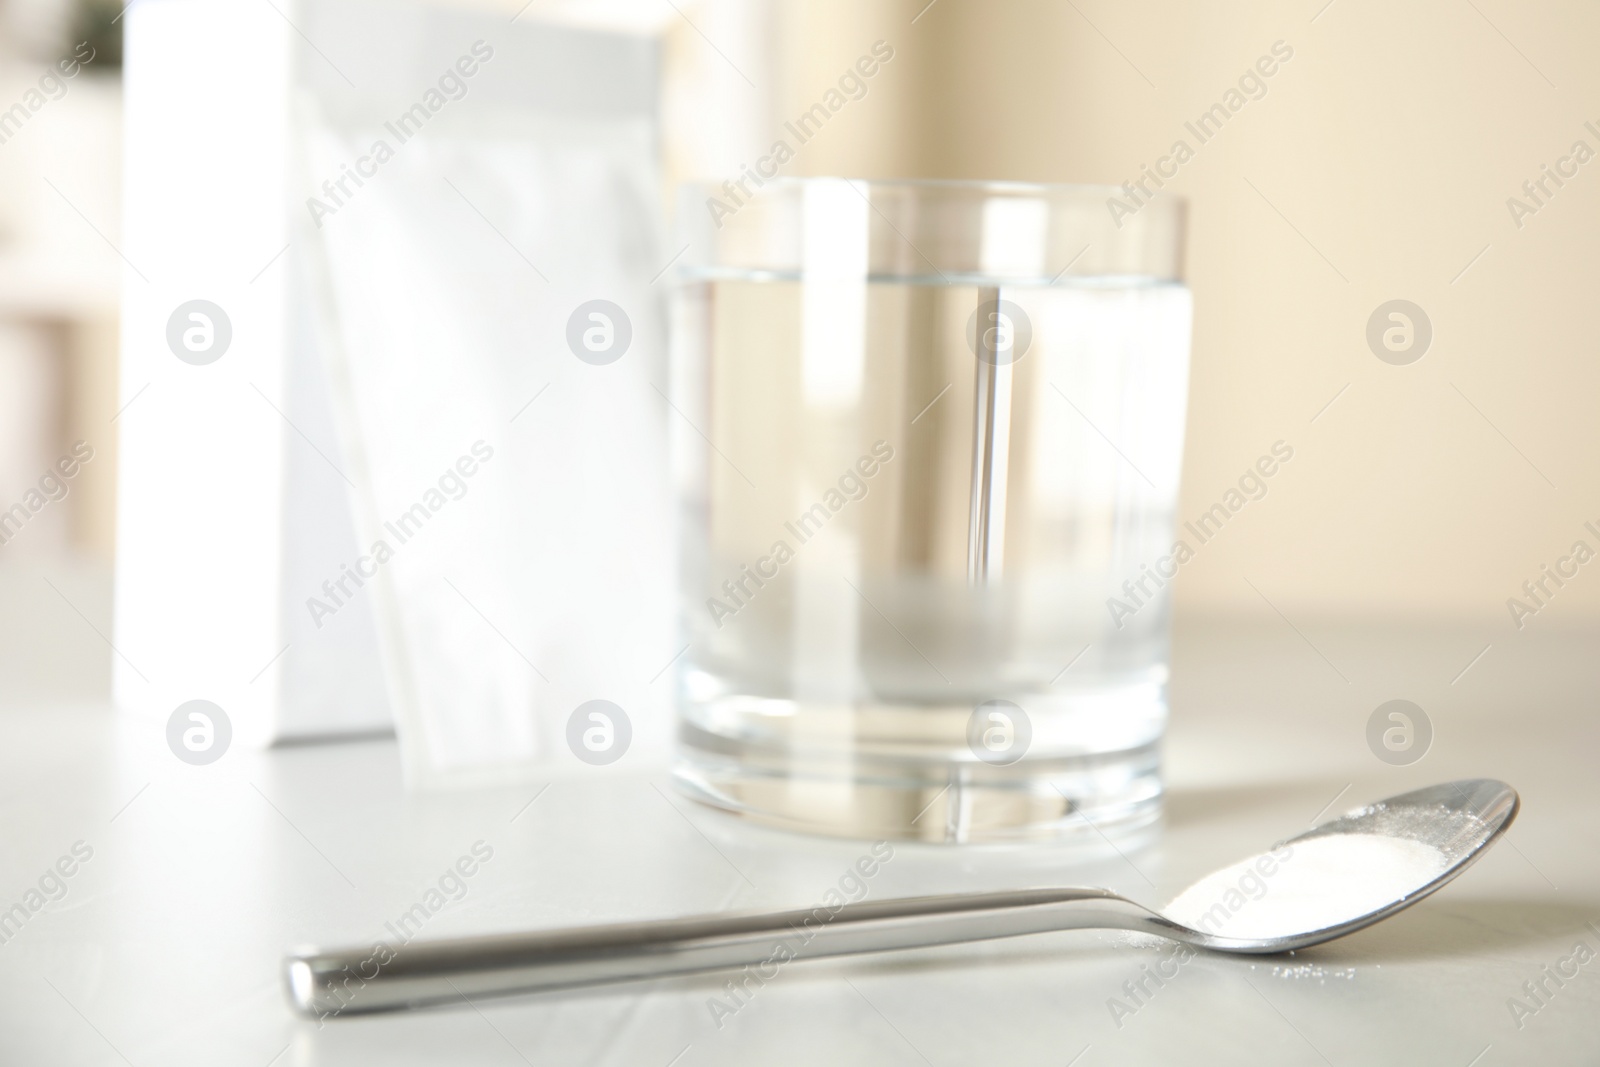 Photo of Medicine sachet, glass of water and spoon on light table